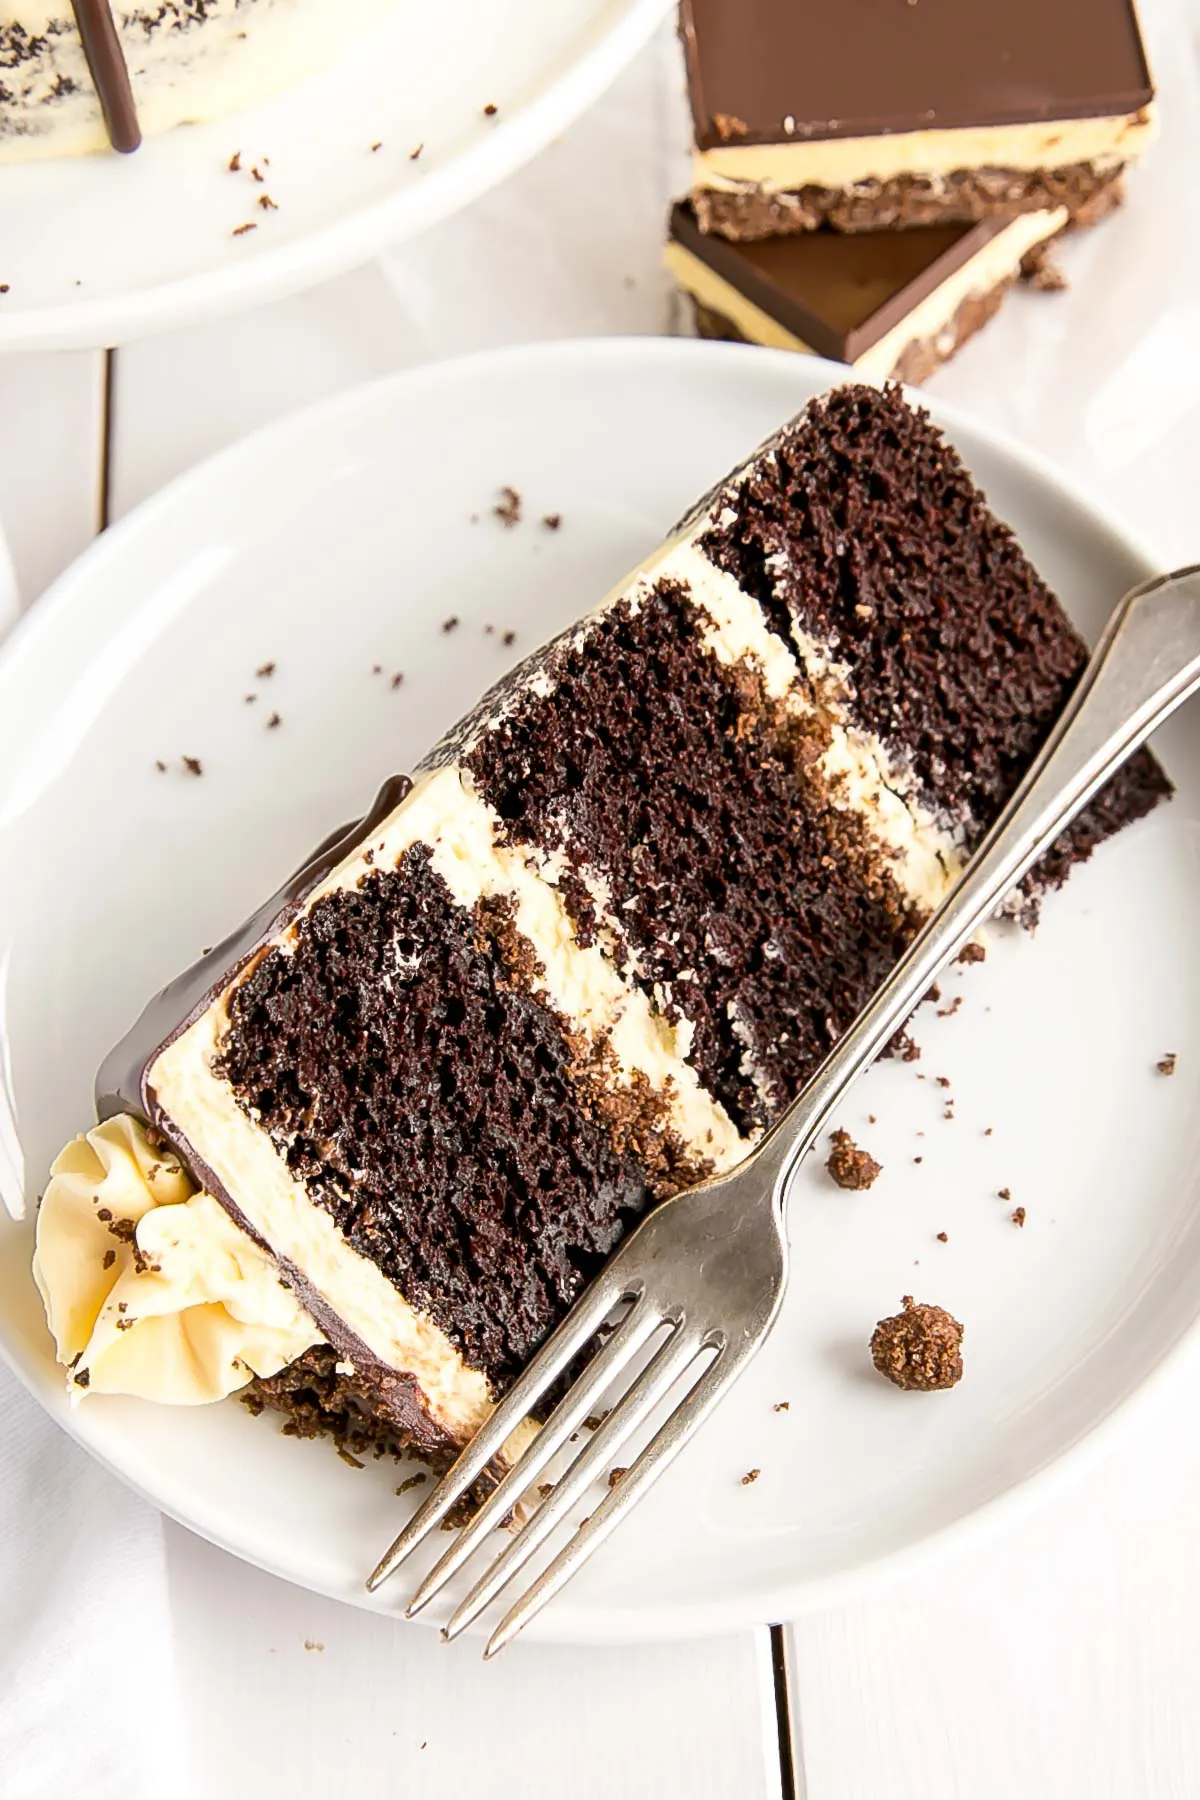 Slice of the Nanaimo Bar cake showing layers of custard frosting and cookie crumble.